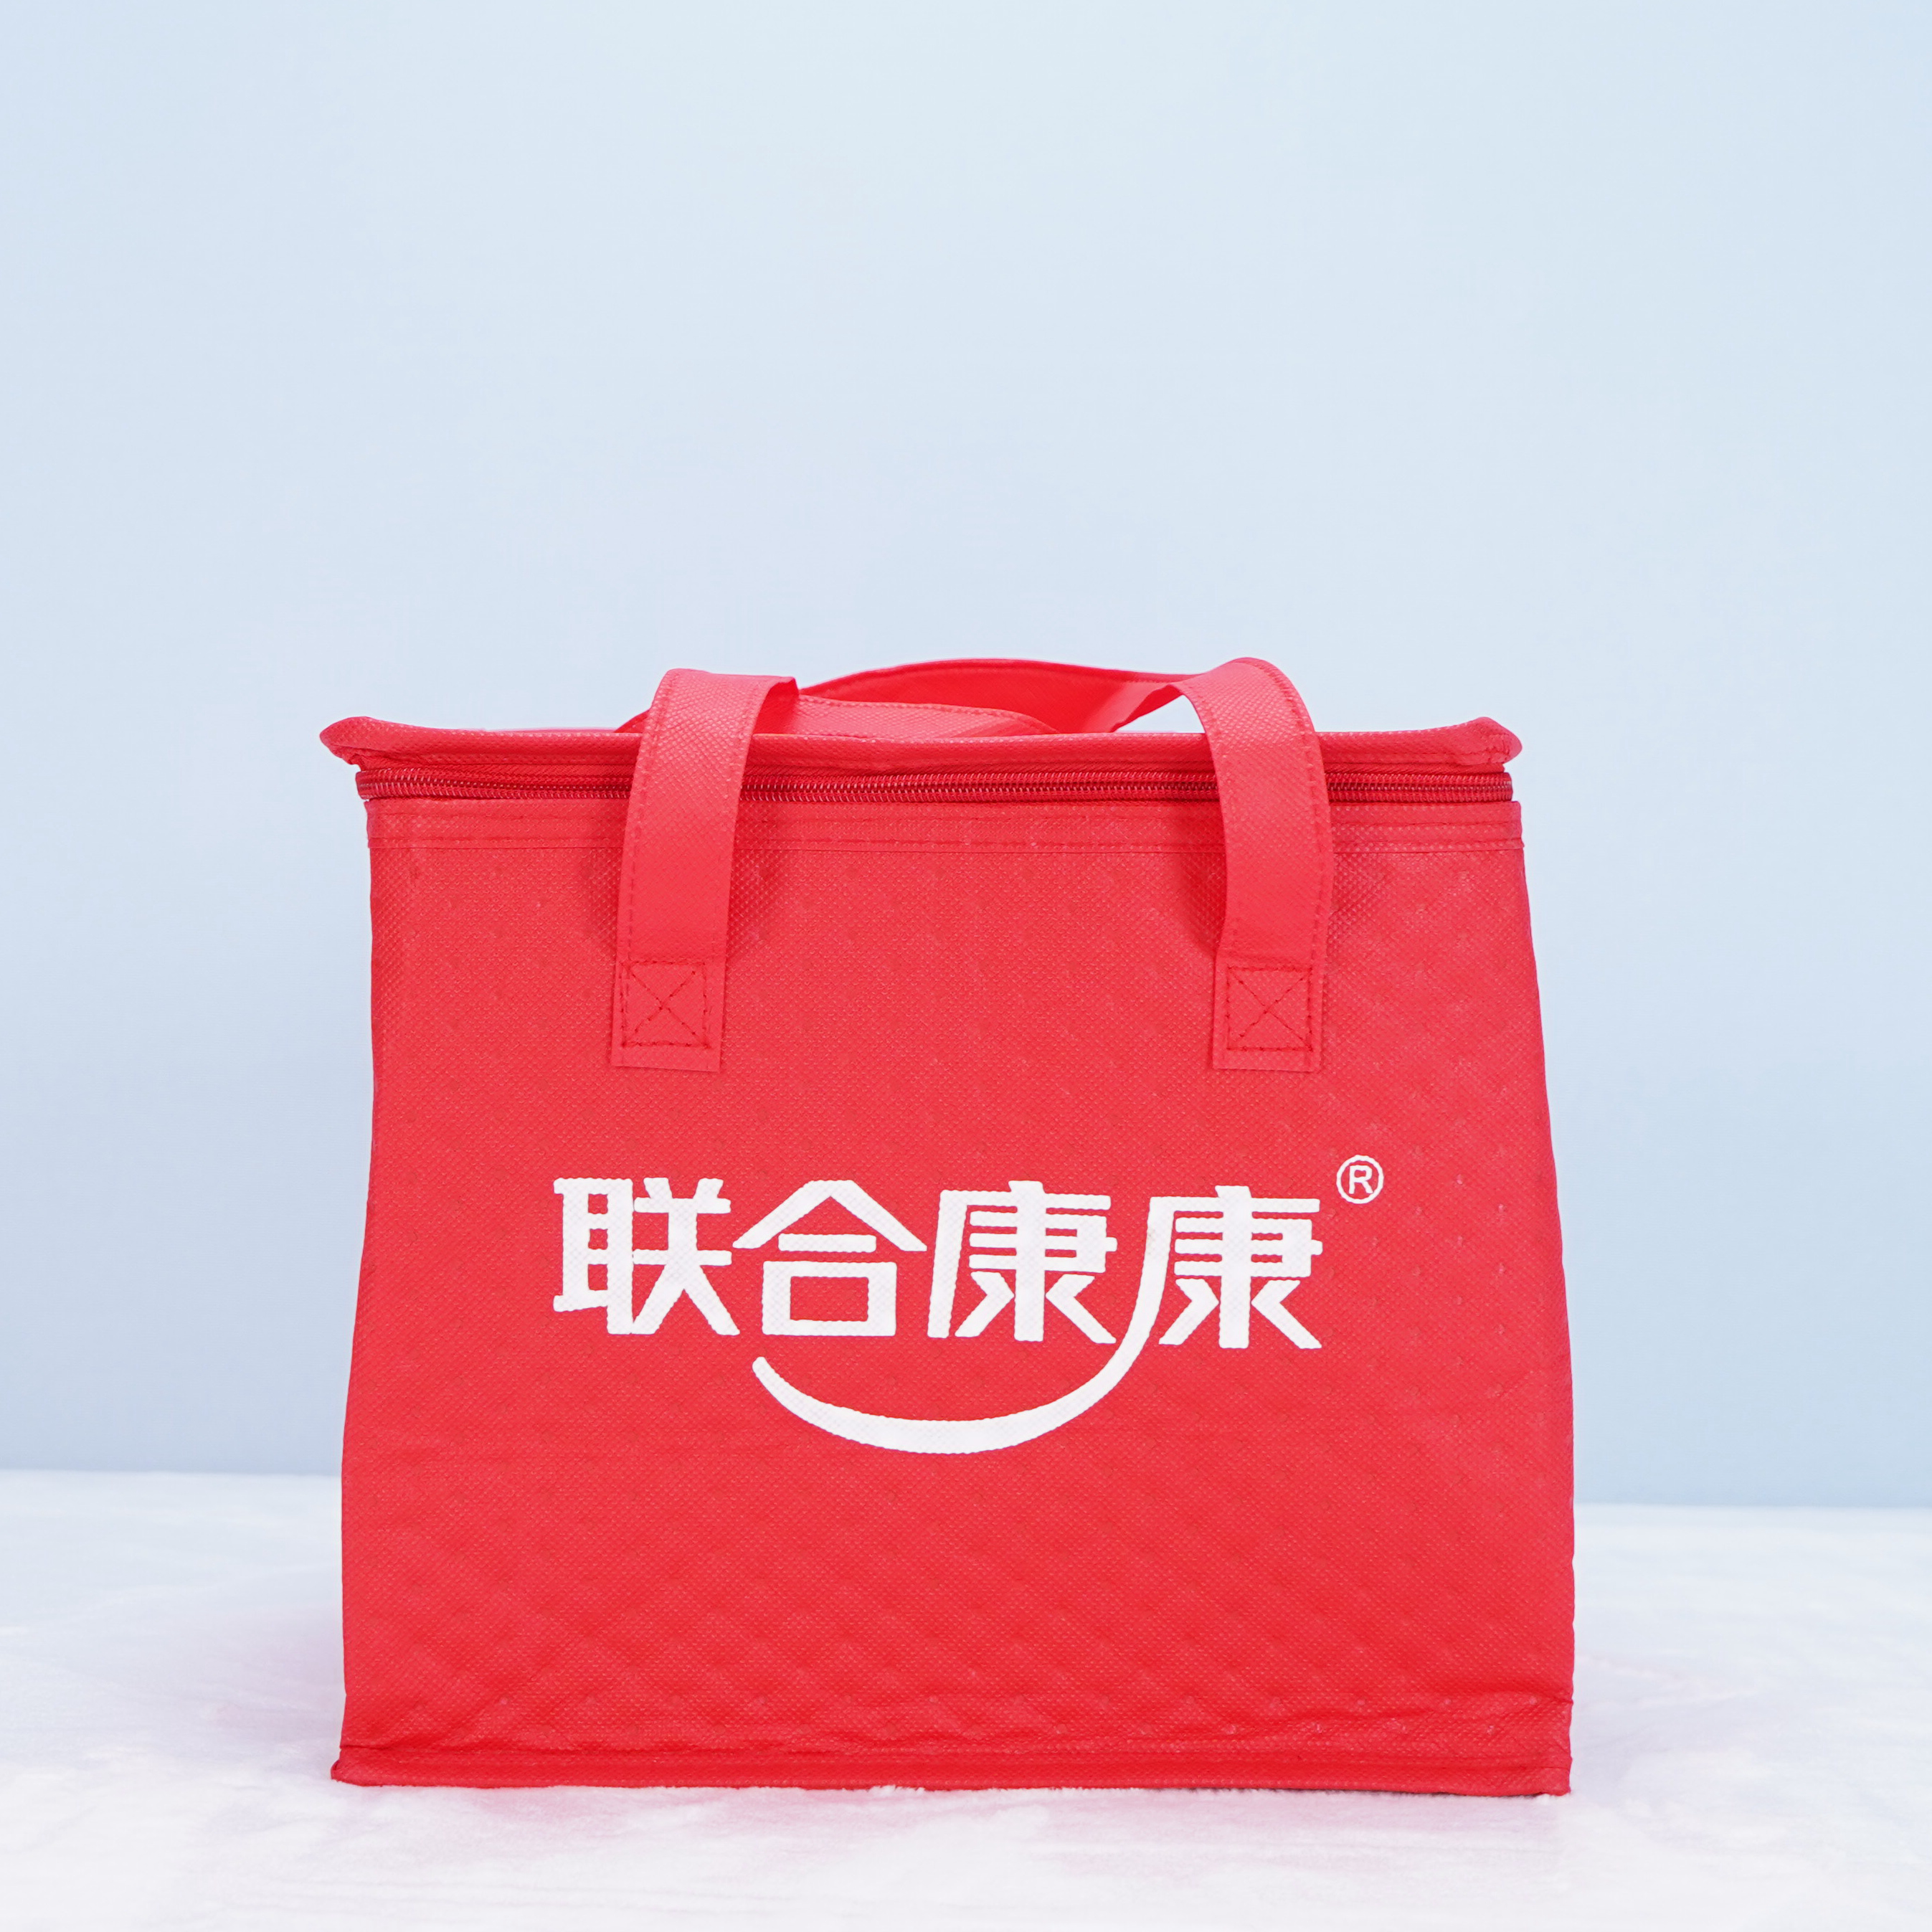 //v4-upload.goalsites.com/760/image_1652692170_Silk-printing-Heat-transfer-printing-Hand-Sewing-PP-non-woven-fabric-with-hot-stamping-2mm-foam-alumium-cooler-bag-thermal-bag-1-2-(10).JPG